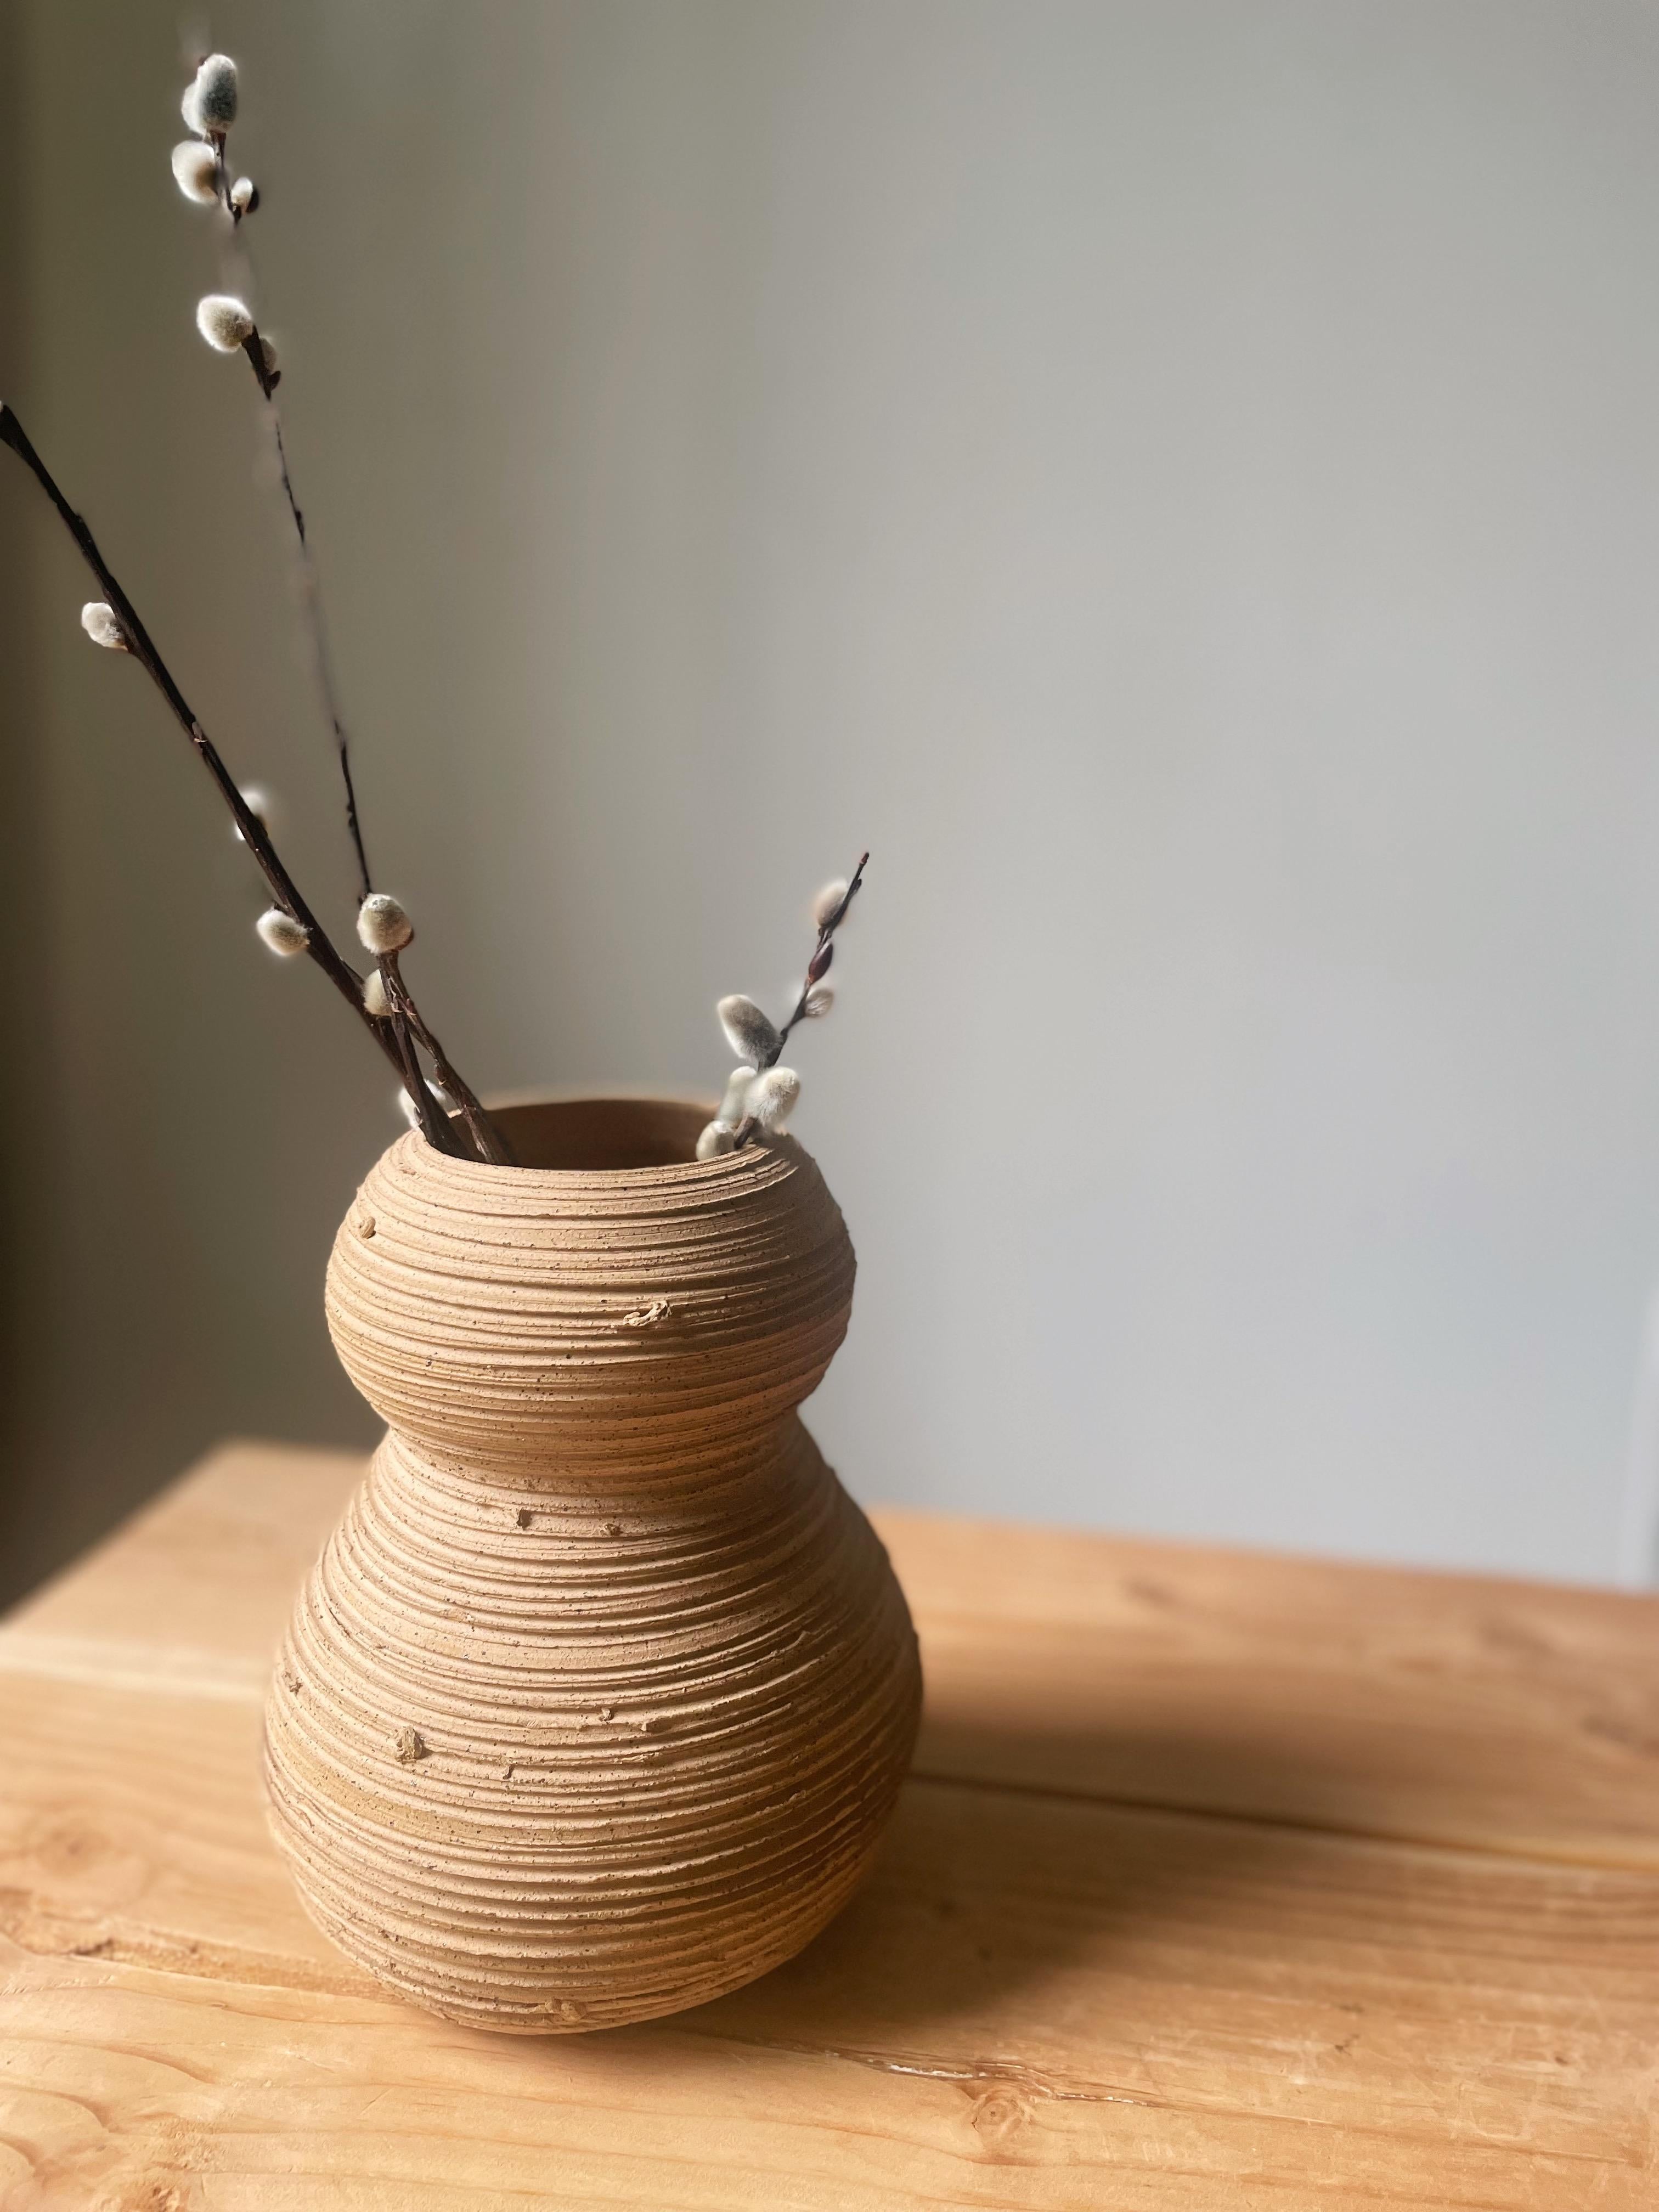 Lotte 001 is part of a collection of vessels I threw on the wheel, starred at for a good few days. and then began carving away at each of them. Some being more carved than others and each shape having a different voice than the last. 

Fully